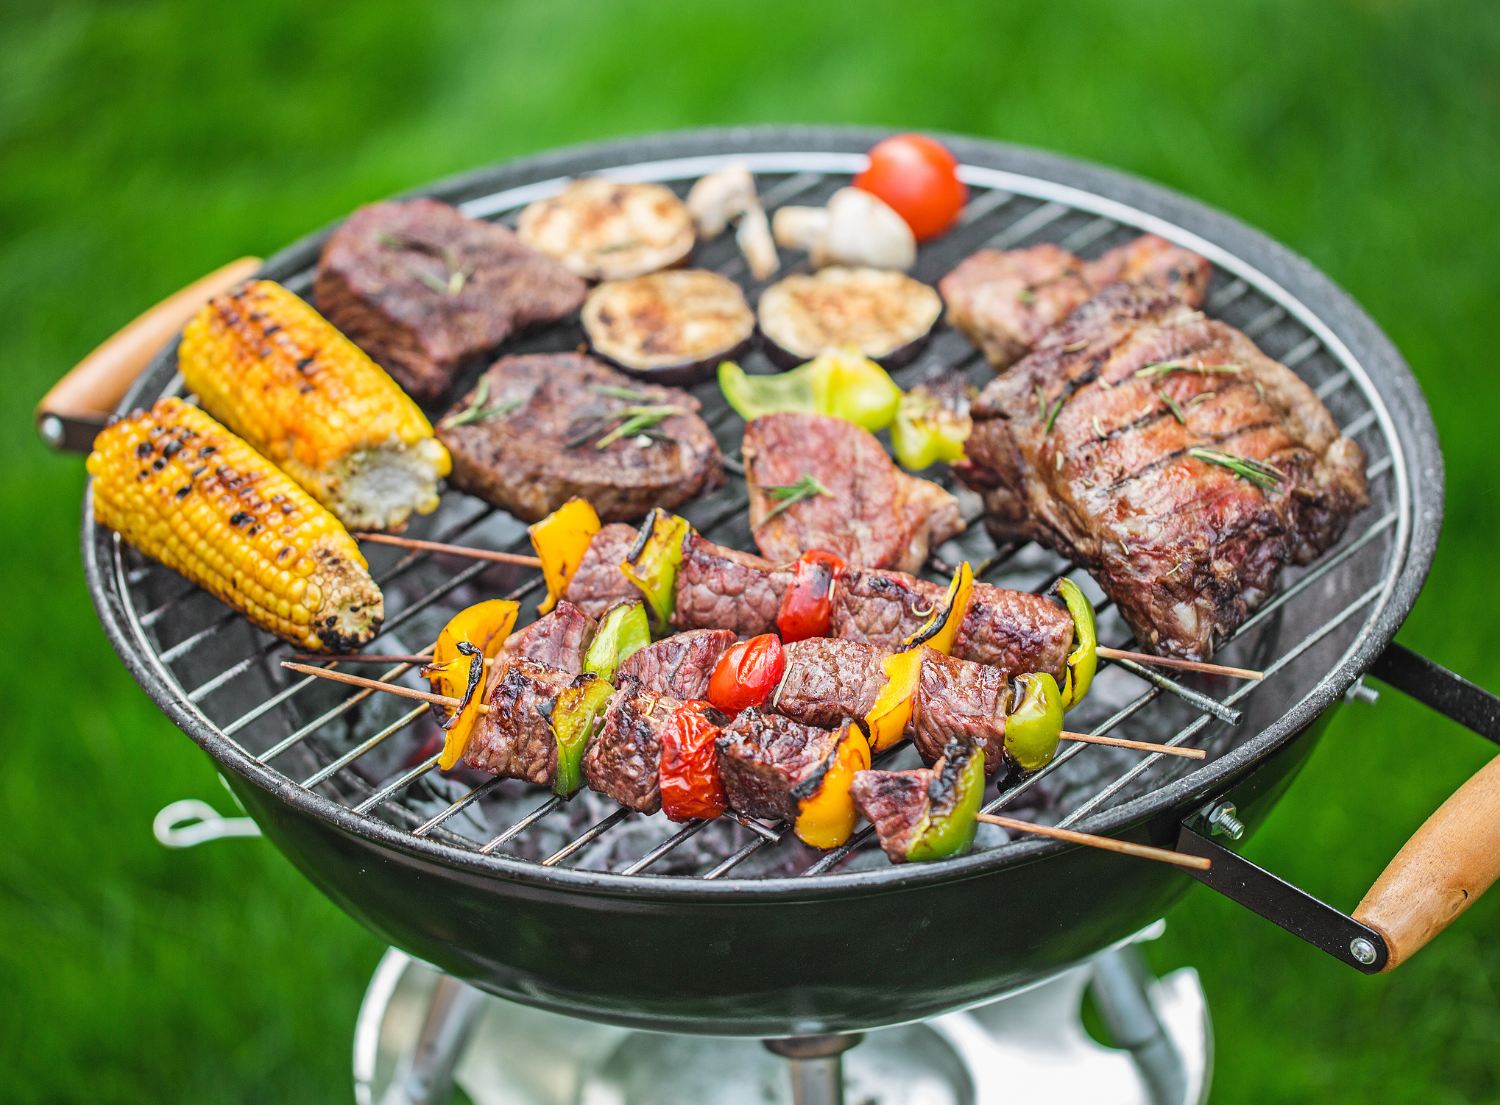 various meats and vegetables being grilled on the BBQ